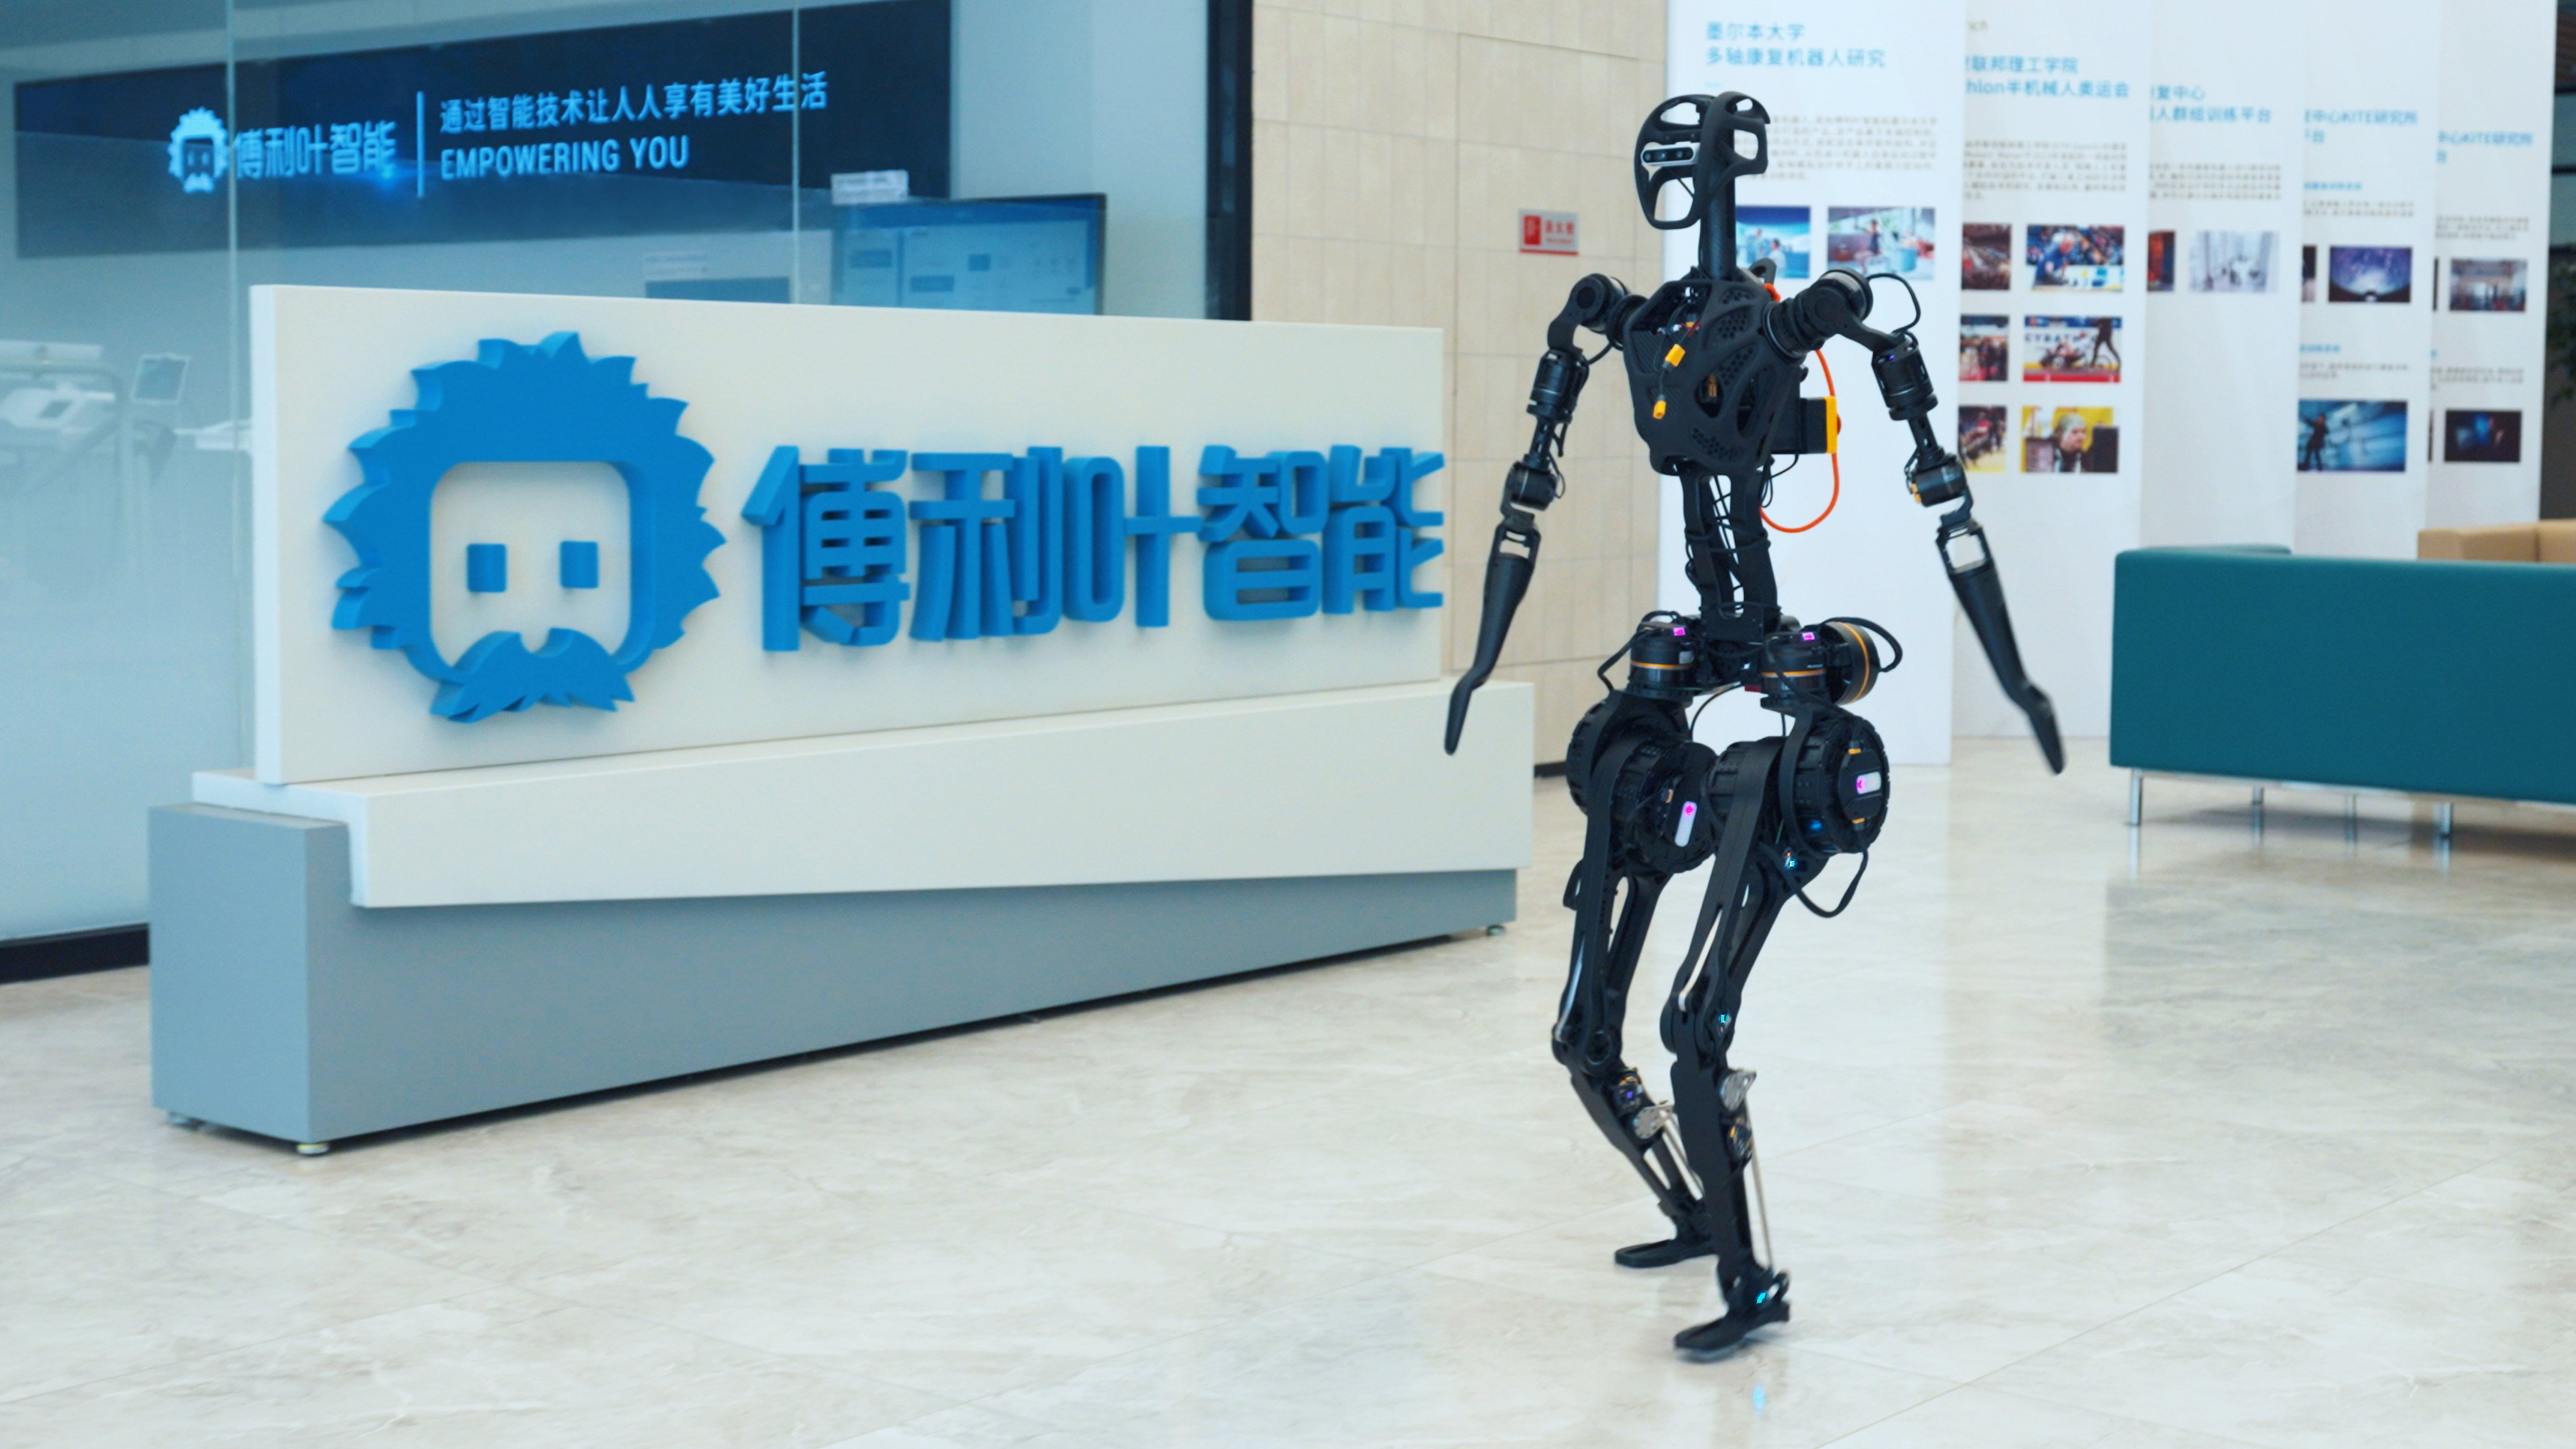 Fourier Intelligence’s GR-1 robot walks past the company logo at its headquarters in Shanghai. Photo: Handout